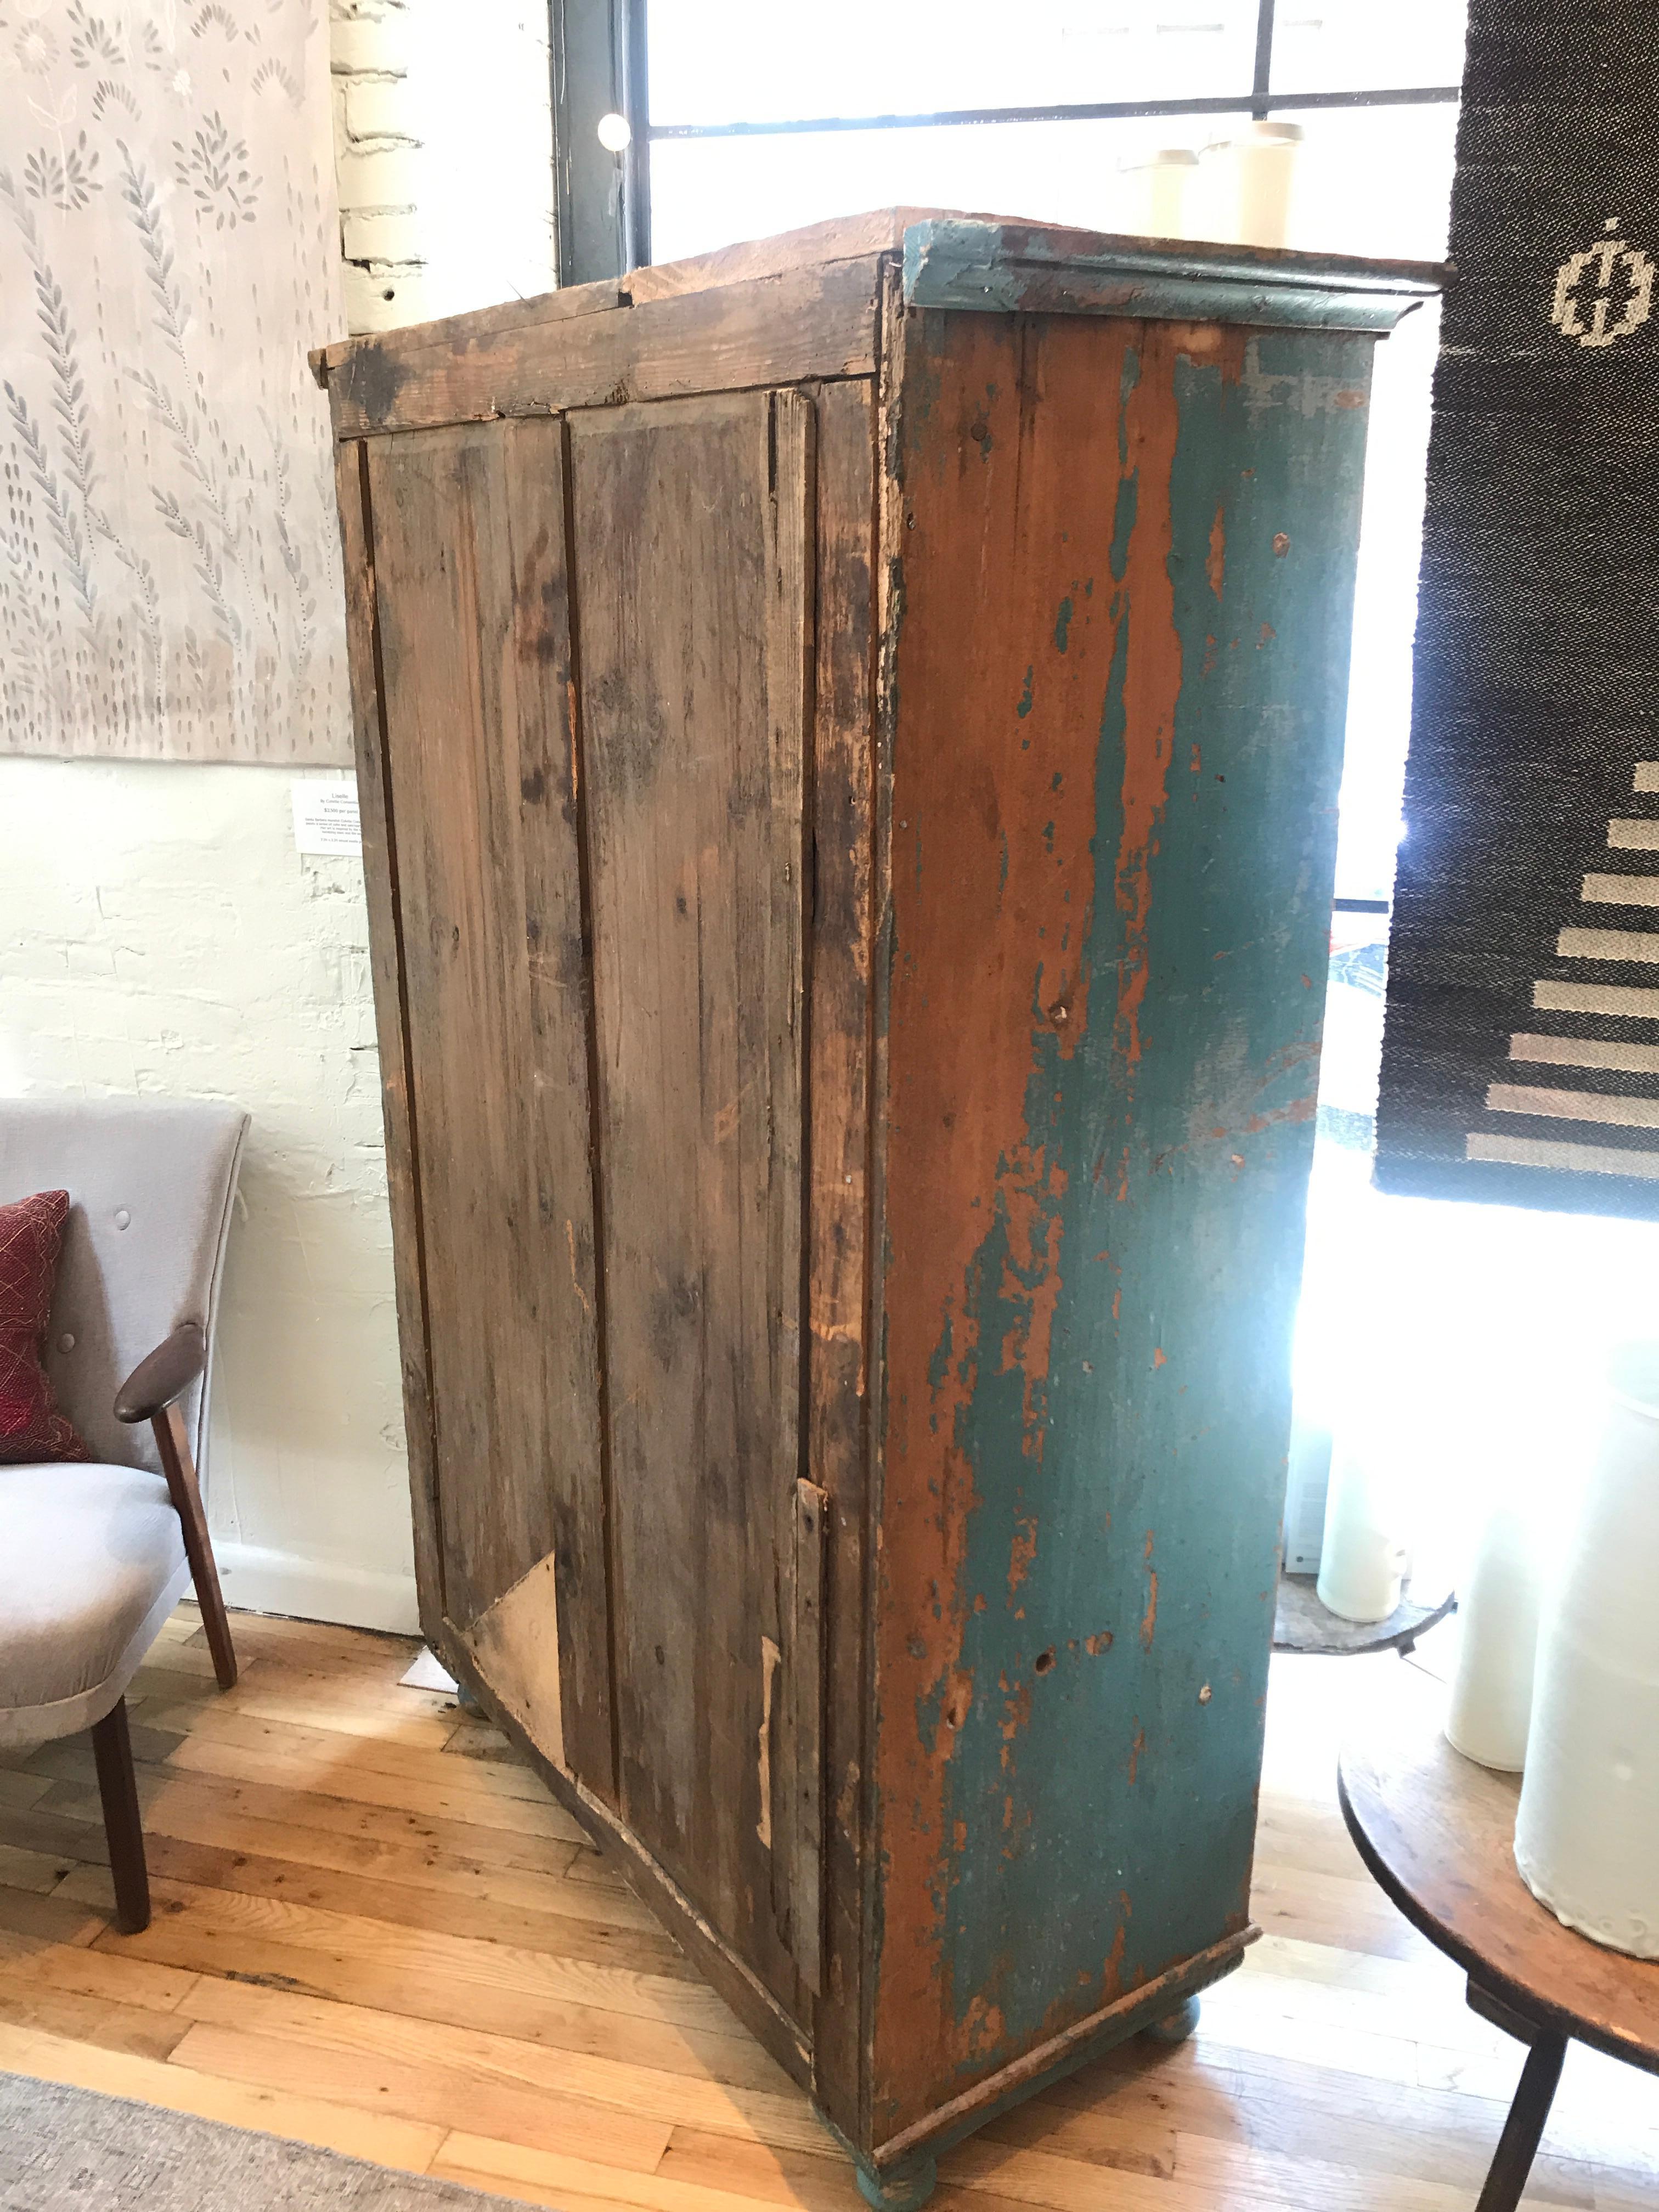 A charming colorful solution for your extra storage needs. With 5 drawers and, ample storage space for shelves. This vintage French wooden cabinet is a sensible show stopper in a lovely teal hue. A real conversation piece with elegant turned feet